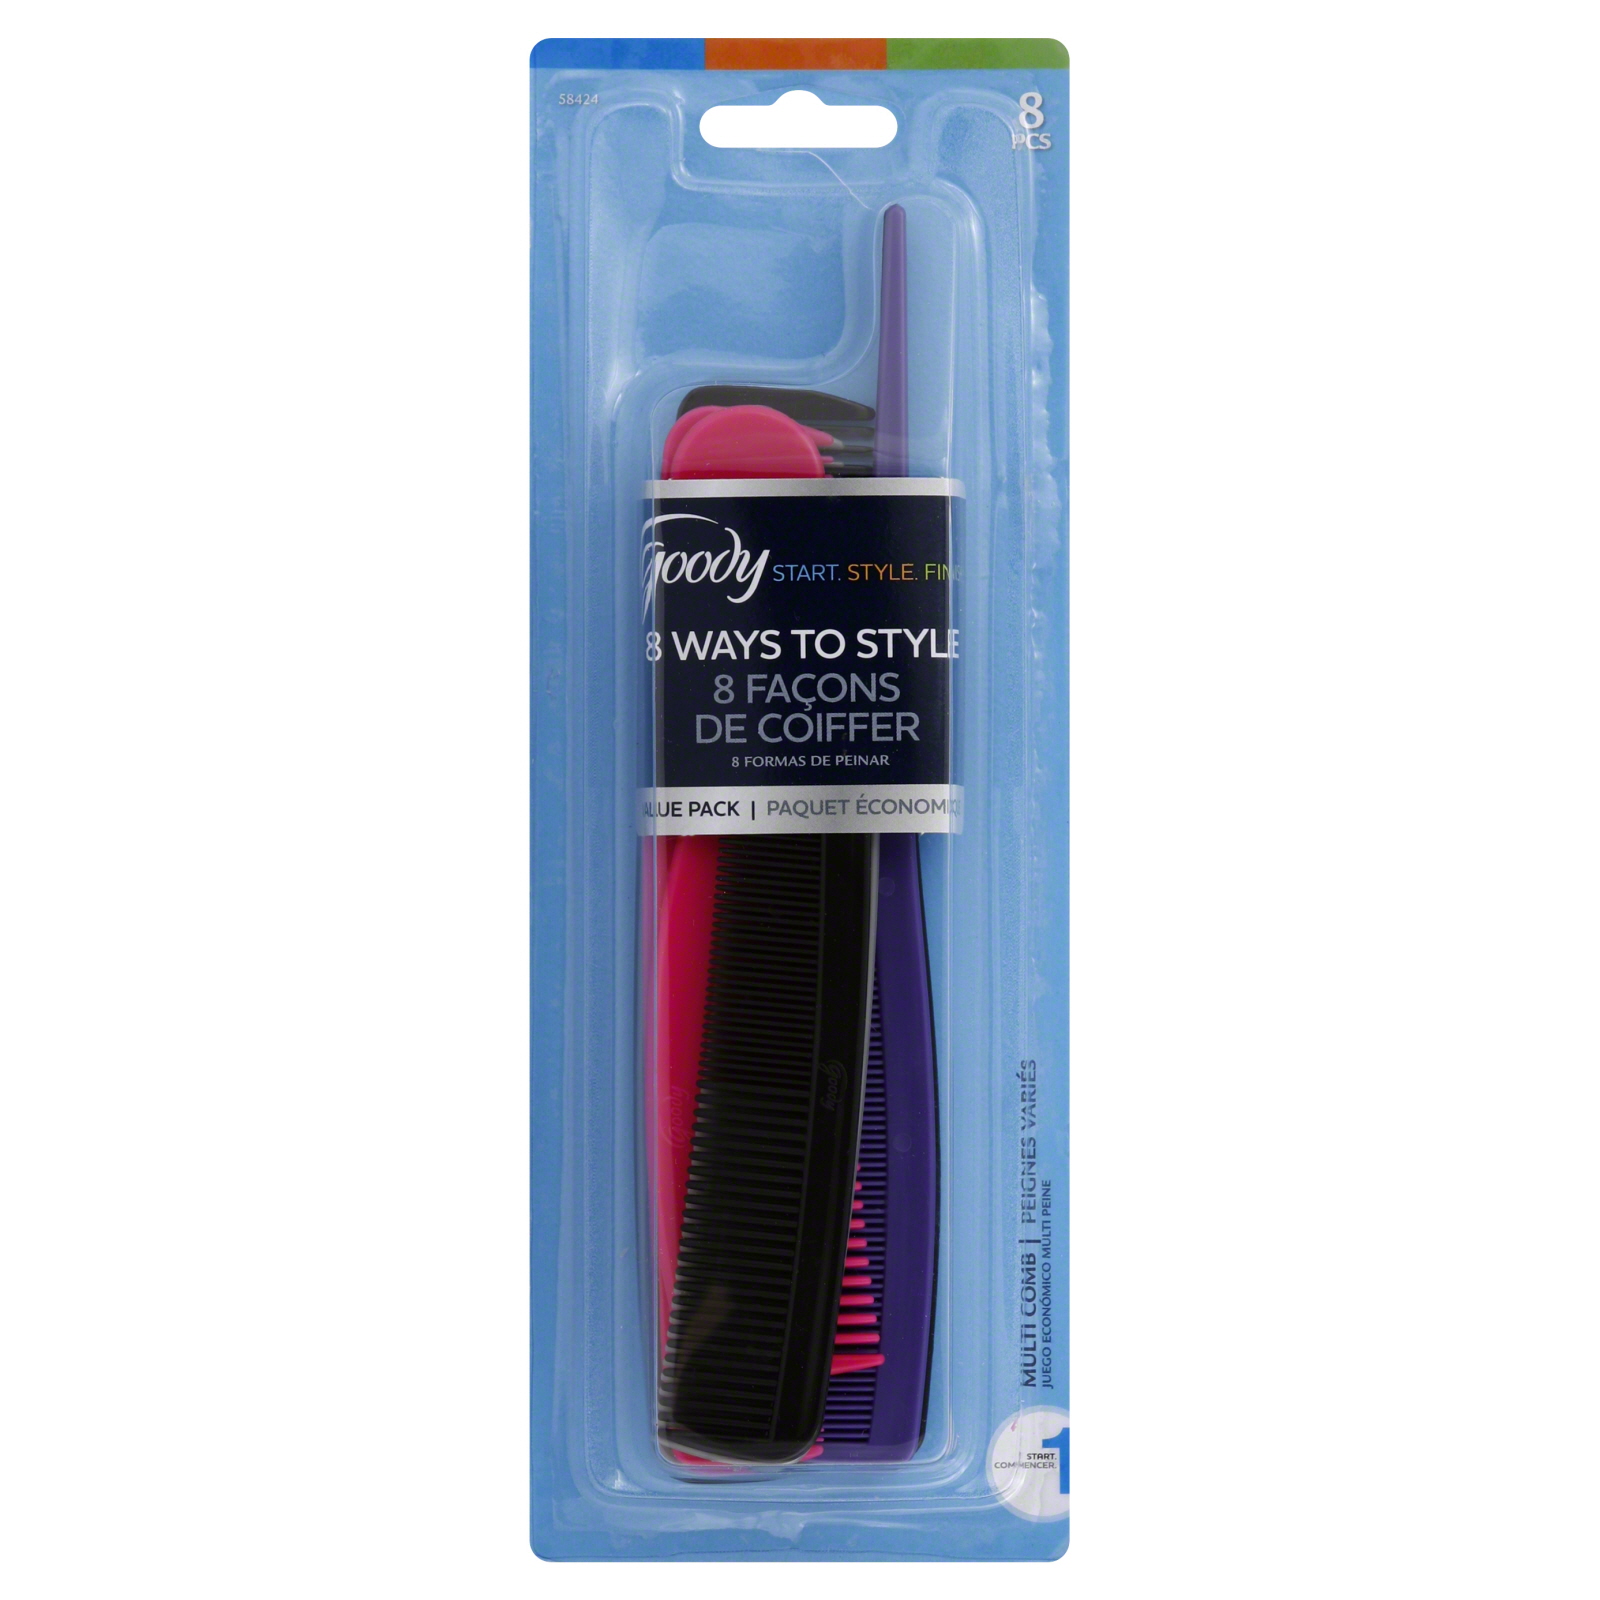 UPC 041457584248 product image for Goody Family Pack Combs, 8 CT | upcitemdb.com